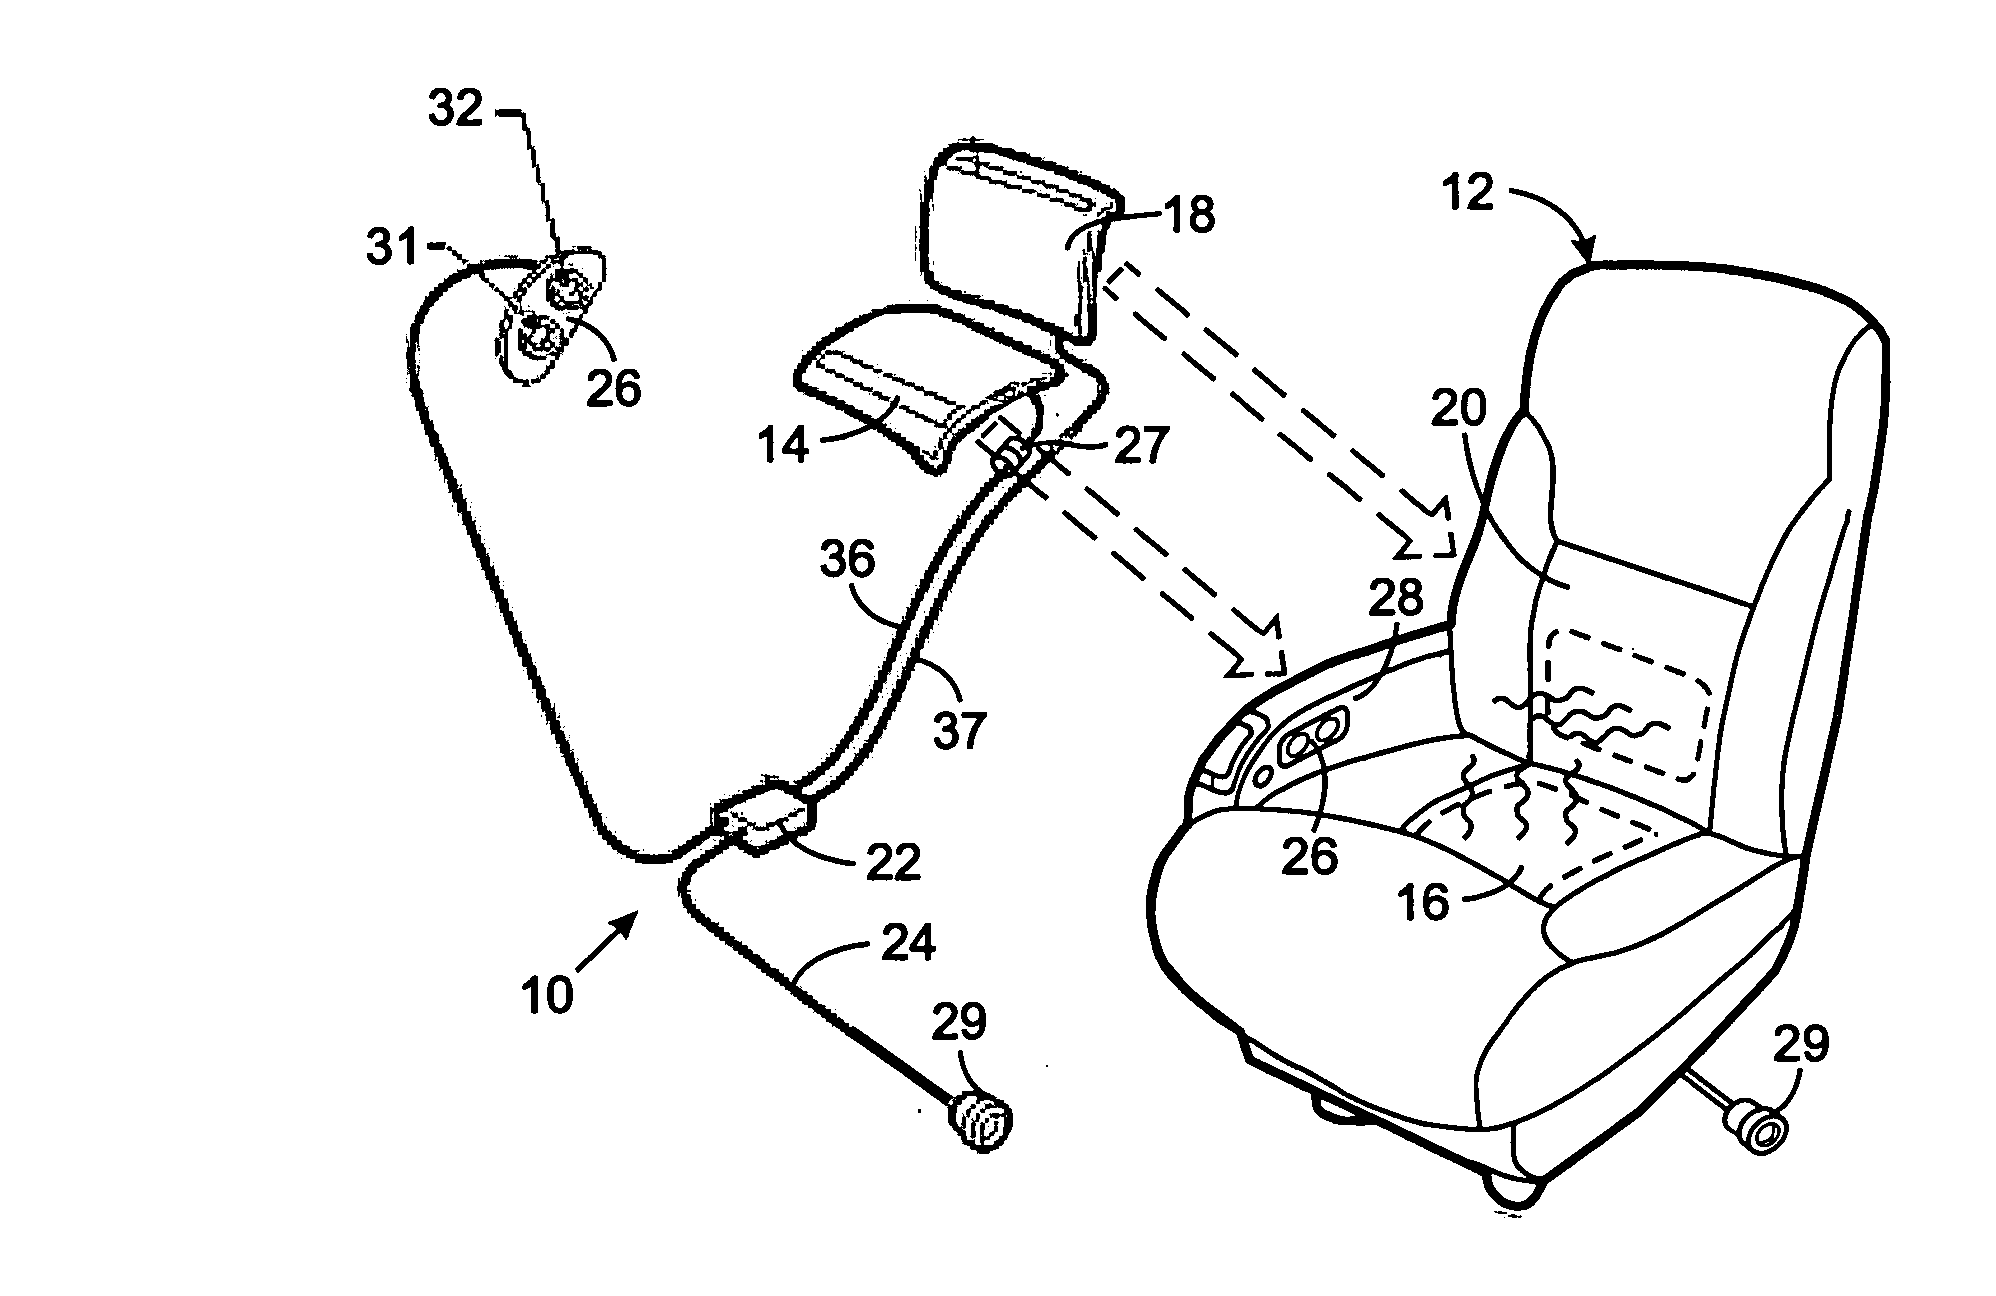 Heater system for an aircraft seat